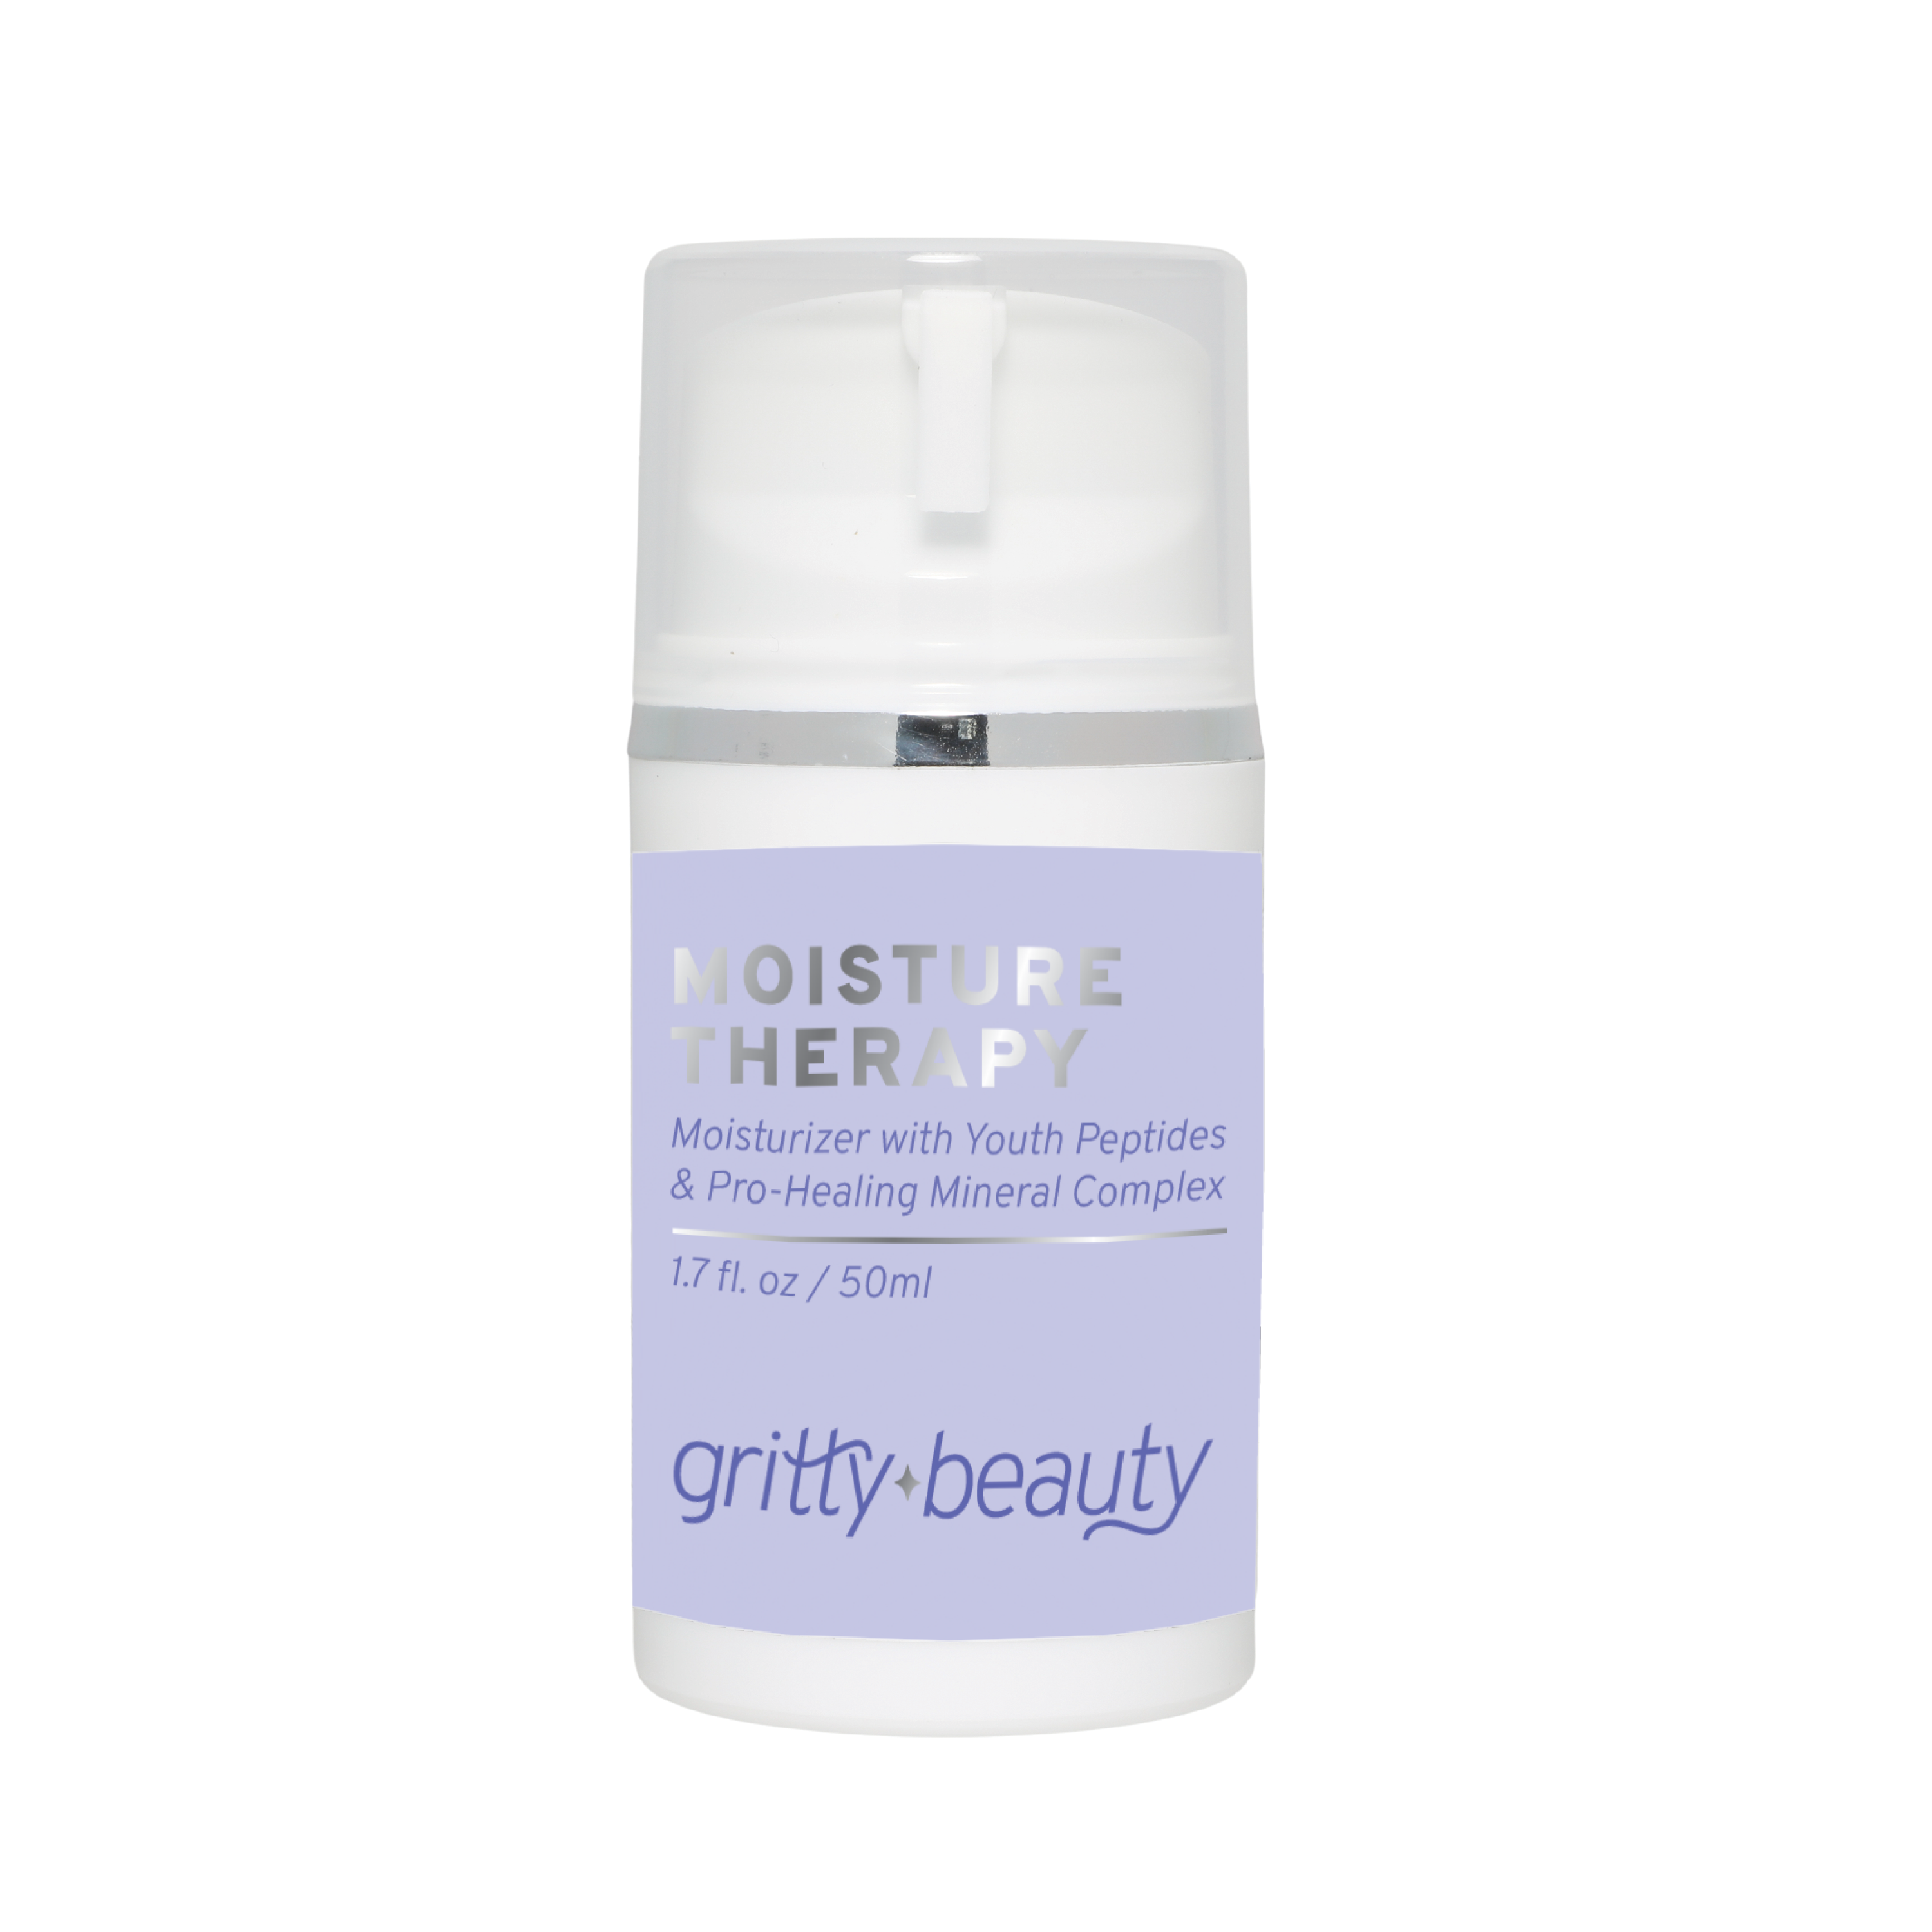 Moisture Therapy | Gritty Beauty - Click to Buy!